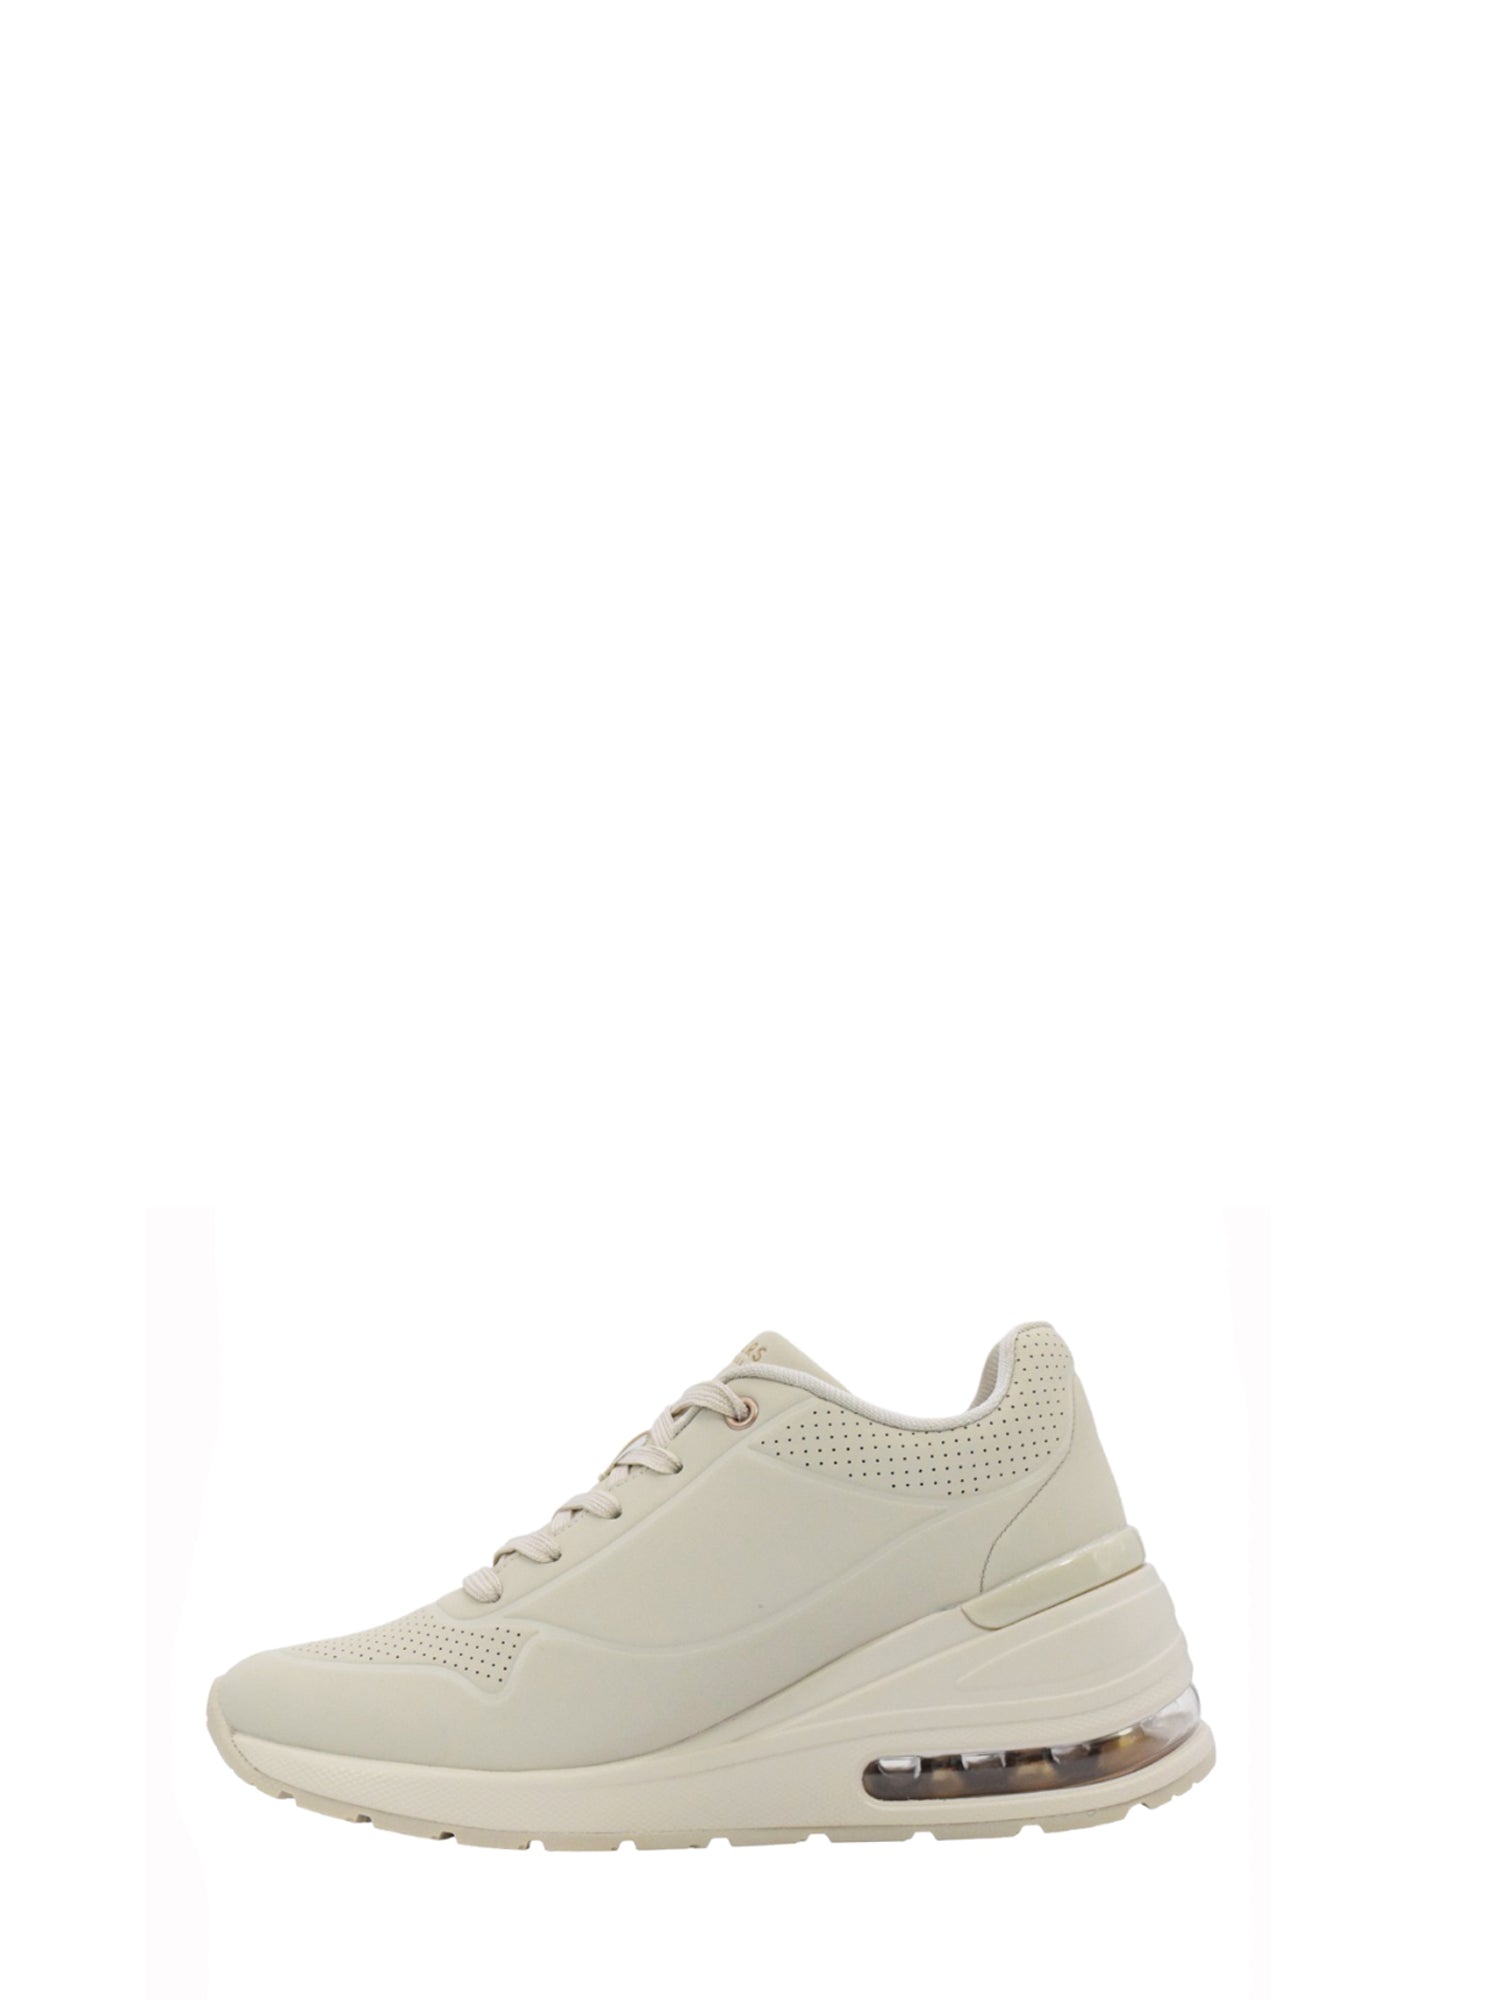 SKECHERS SNEAKERS MILLION AIR - ELEVATED AIR BIANCO SPORCO